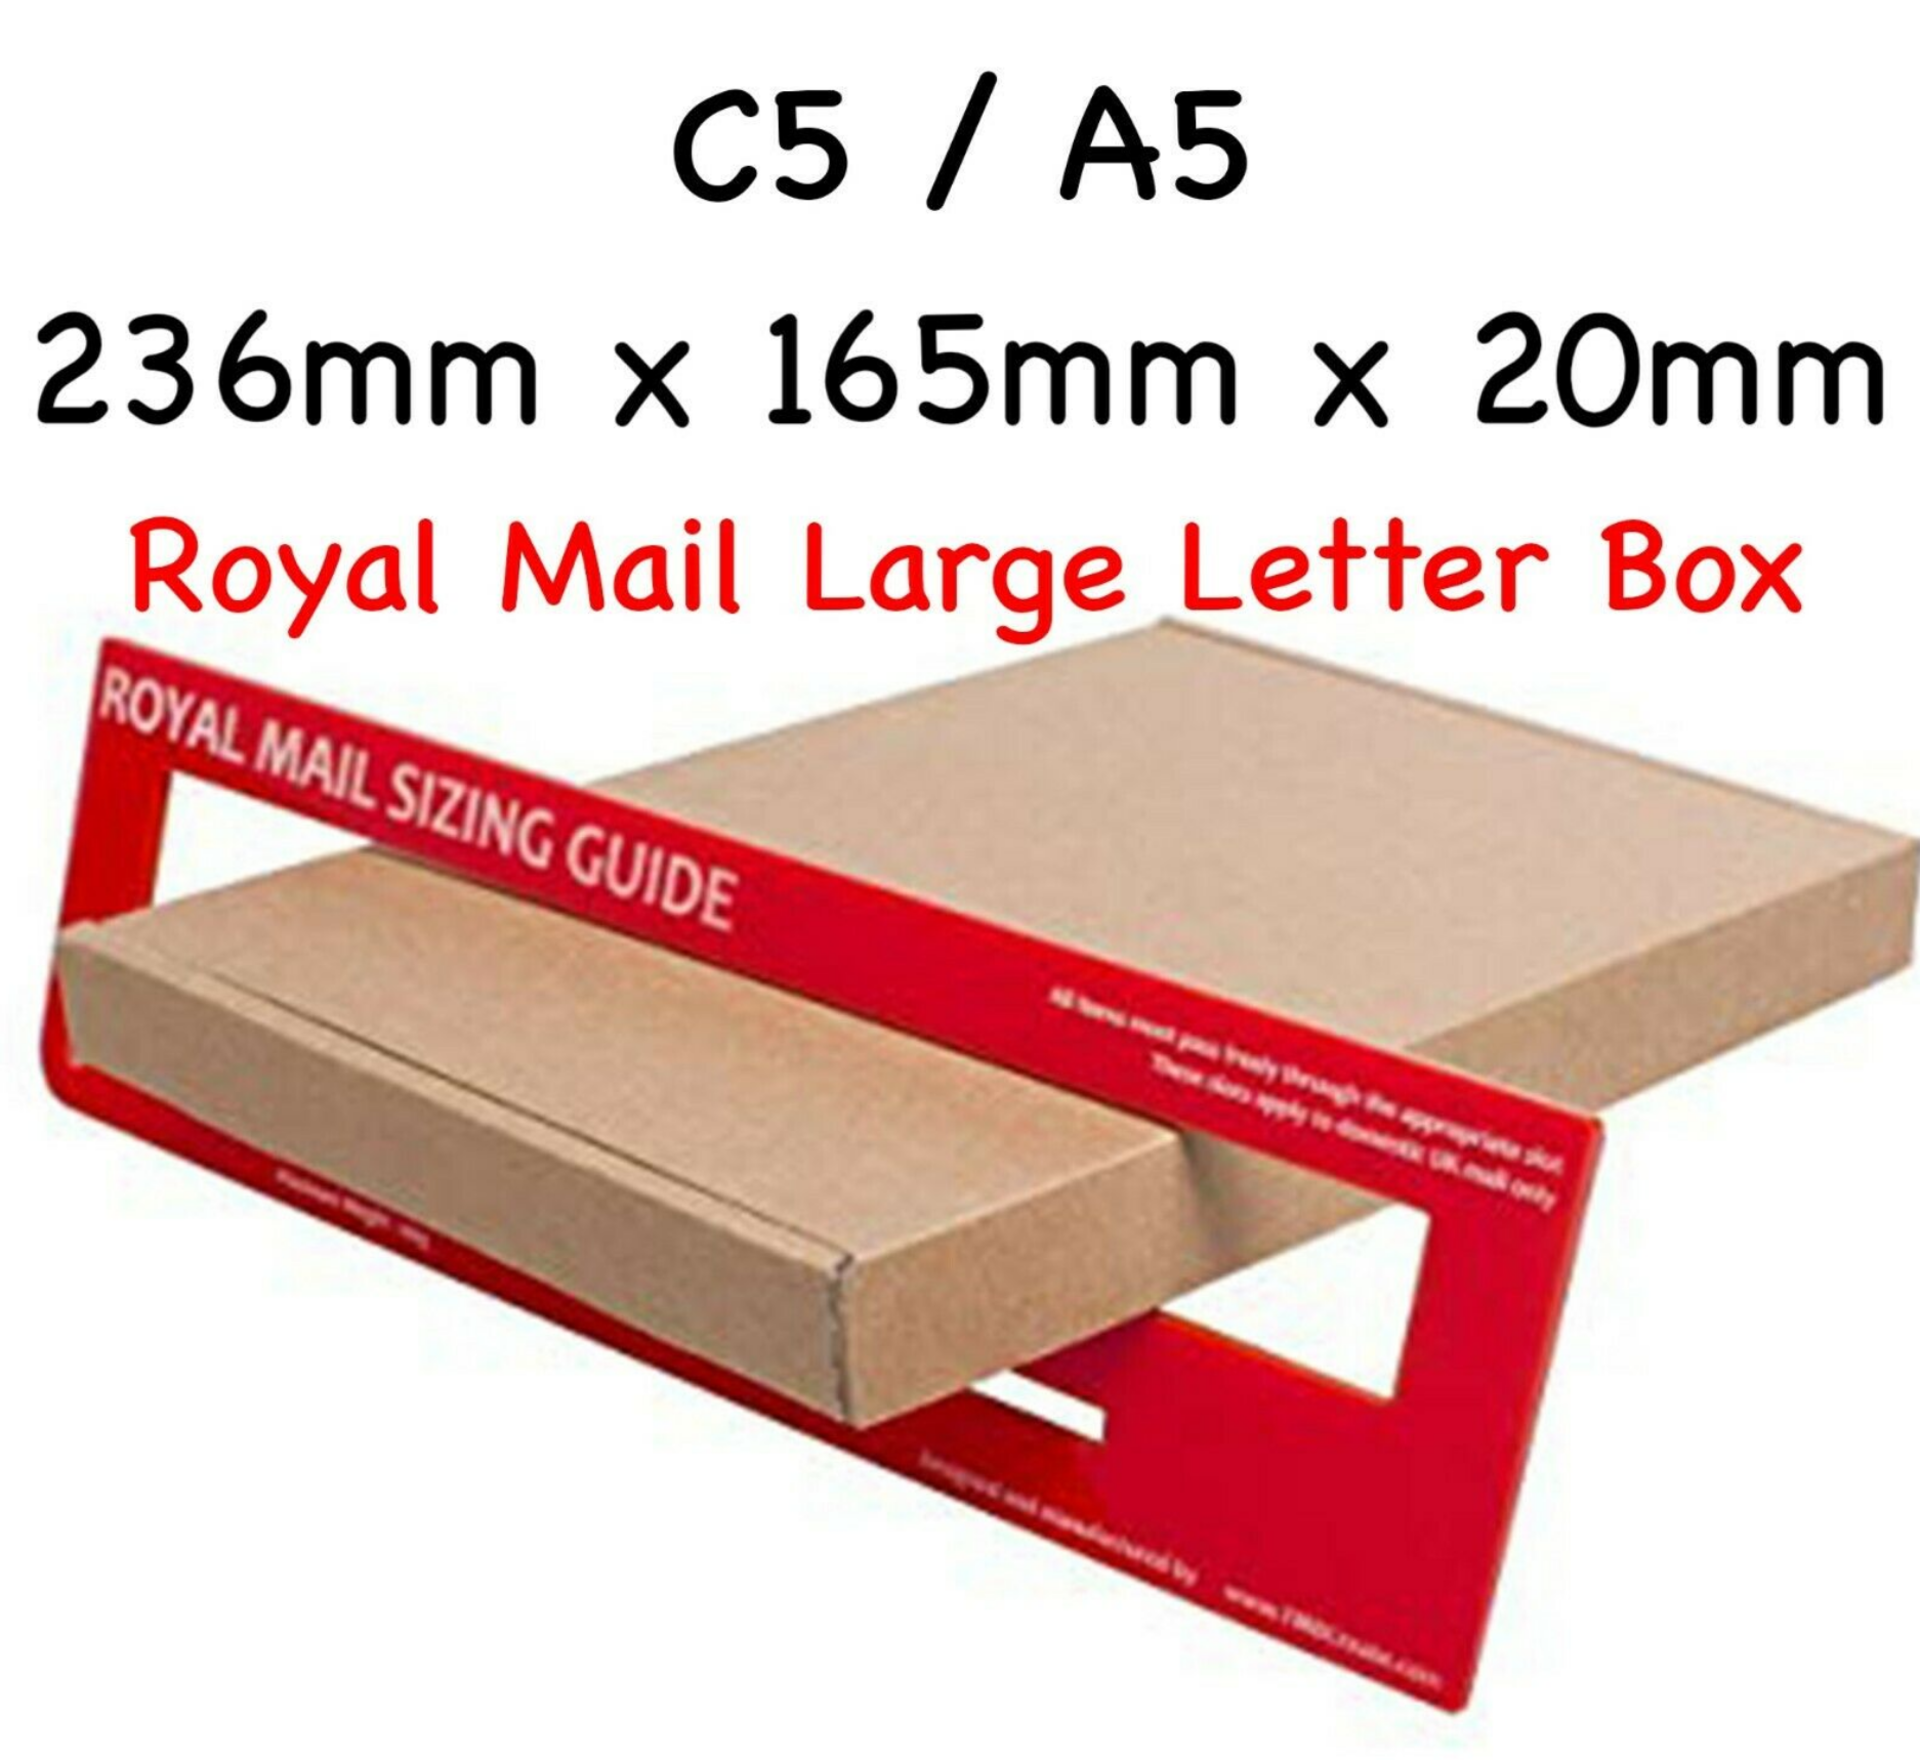 5000 x C5 /A5 Pip Box Shipping Mail Postal Small Letter Boxes - Image 2 of 2